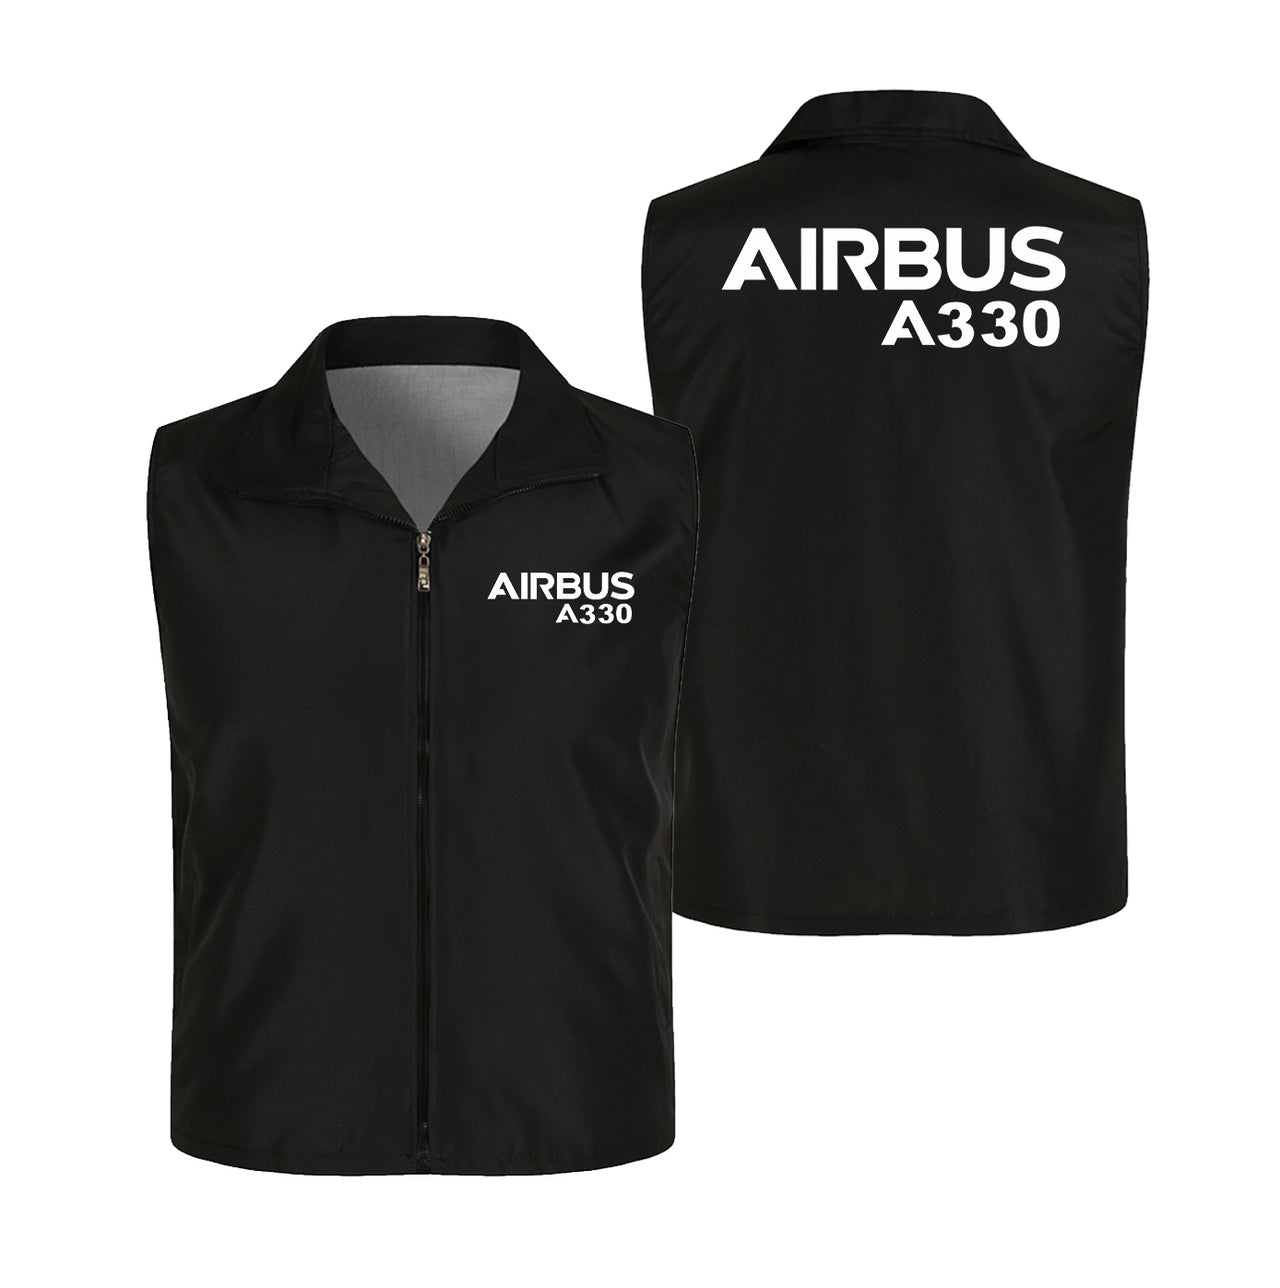 Airbus A330 & Text Designed Thin Style Vests